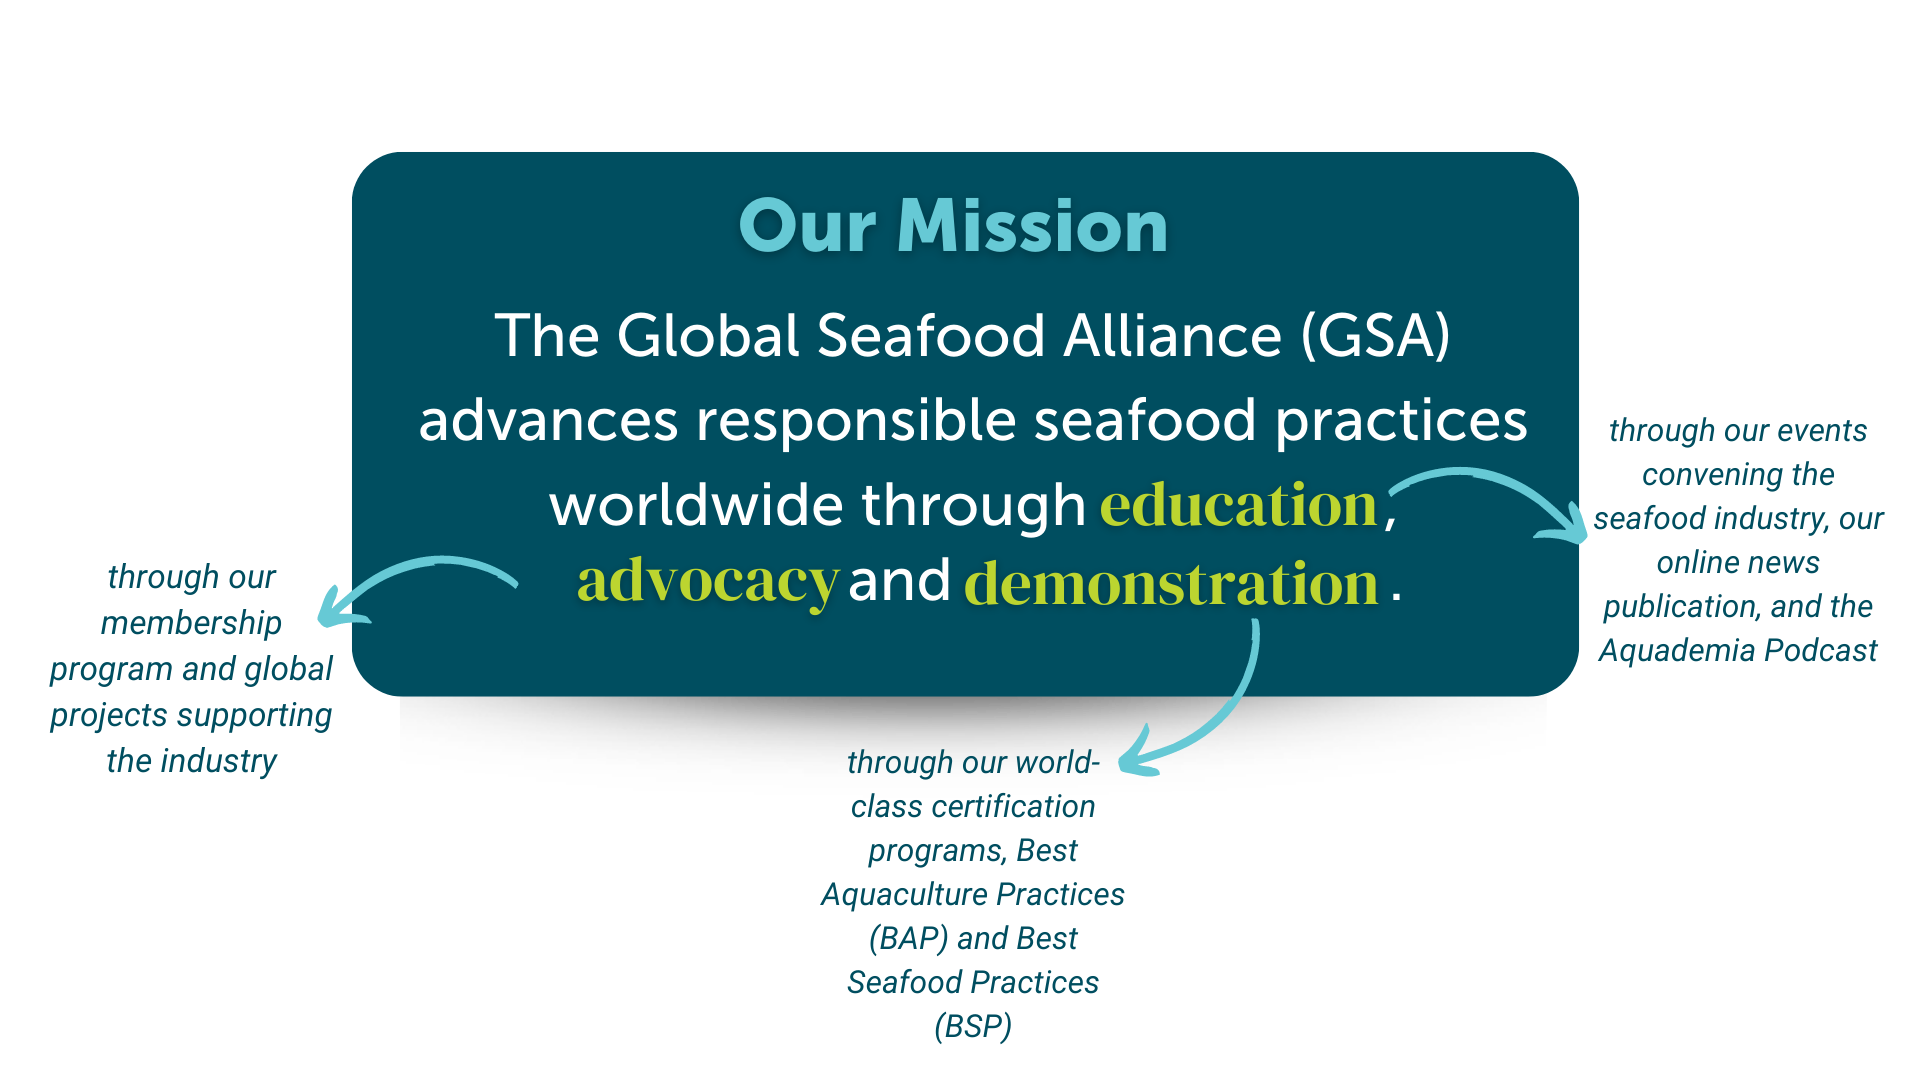 GSA advances responsible seafood practices worldwide through education, advocacy and demonstration. (1)